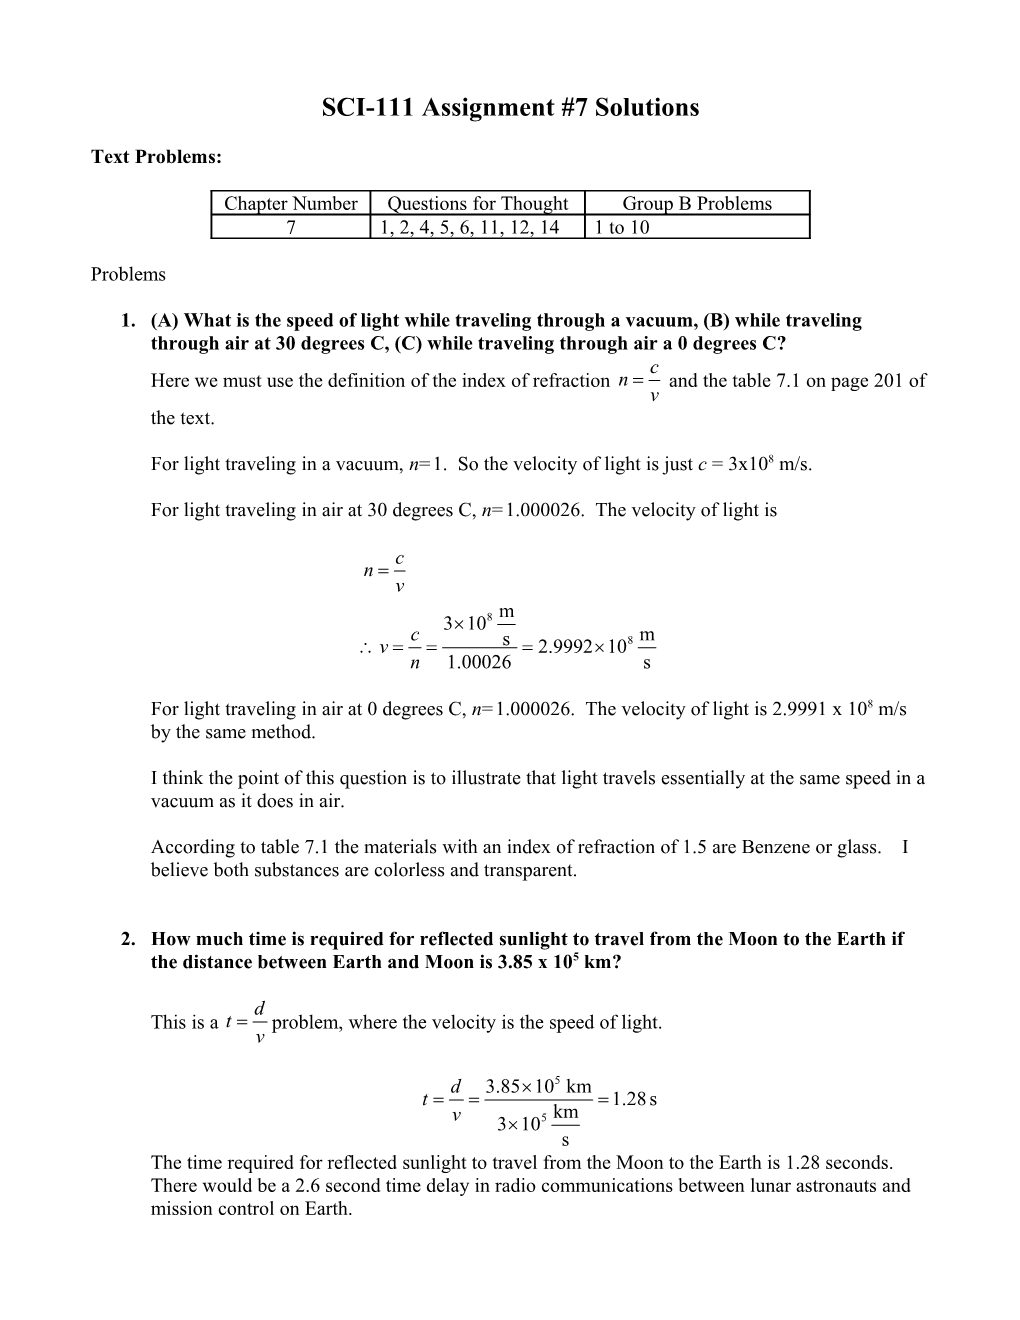 SCI-111 Assignment #7 Solutions